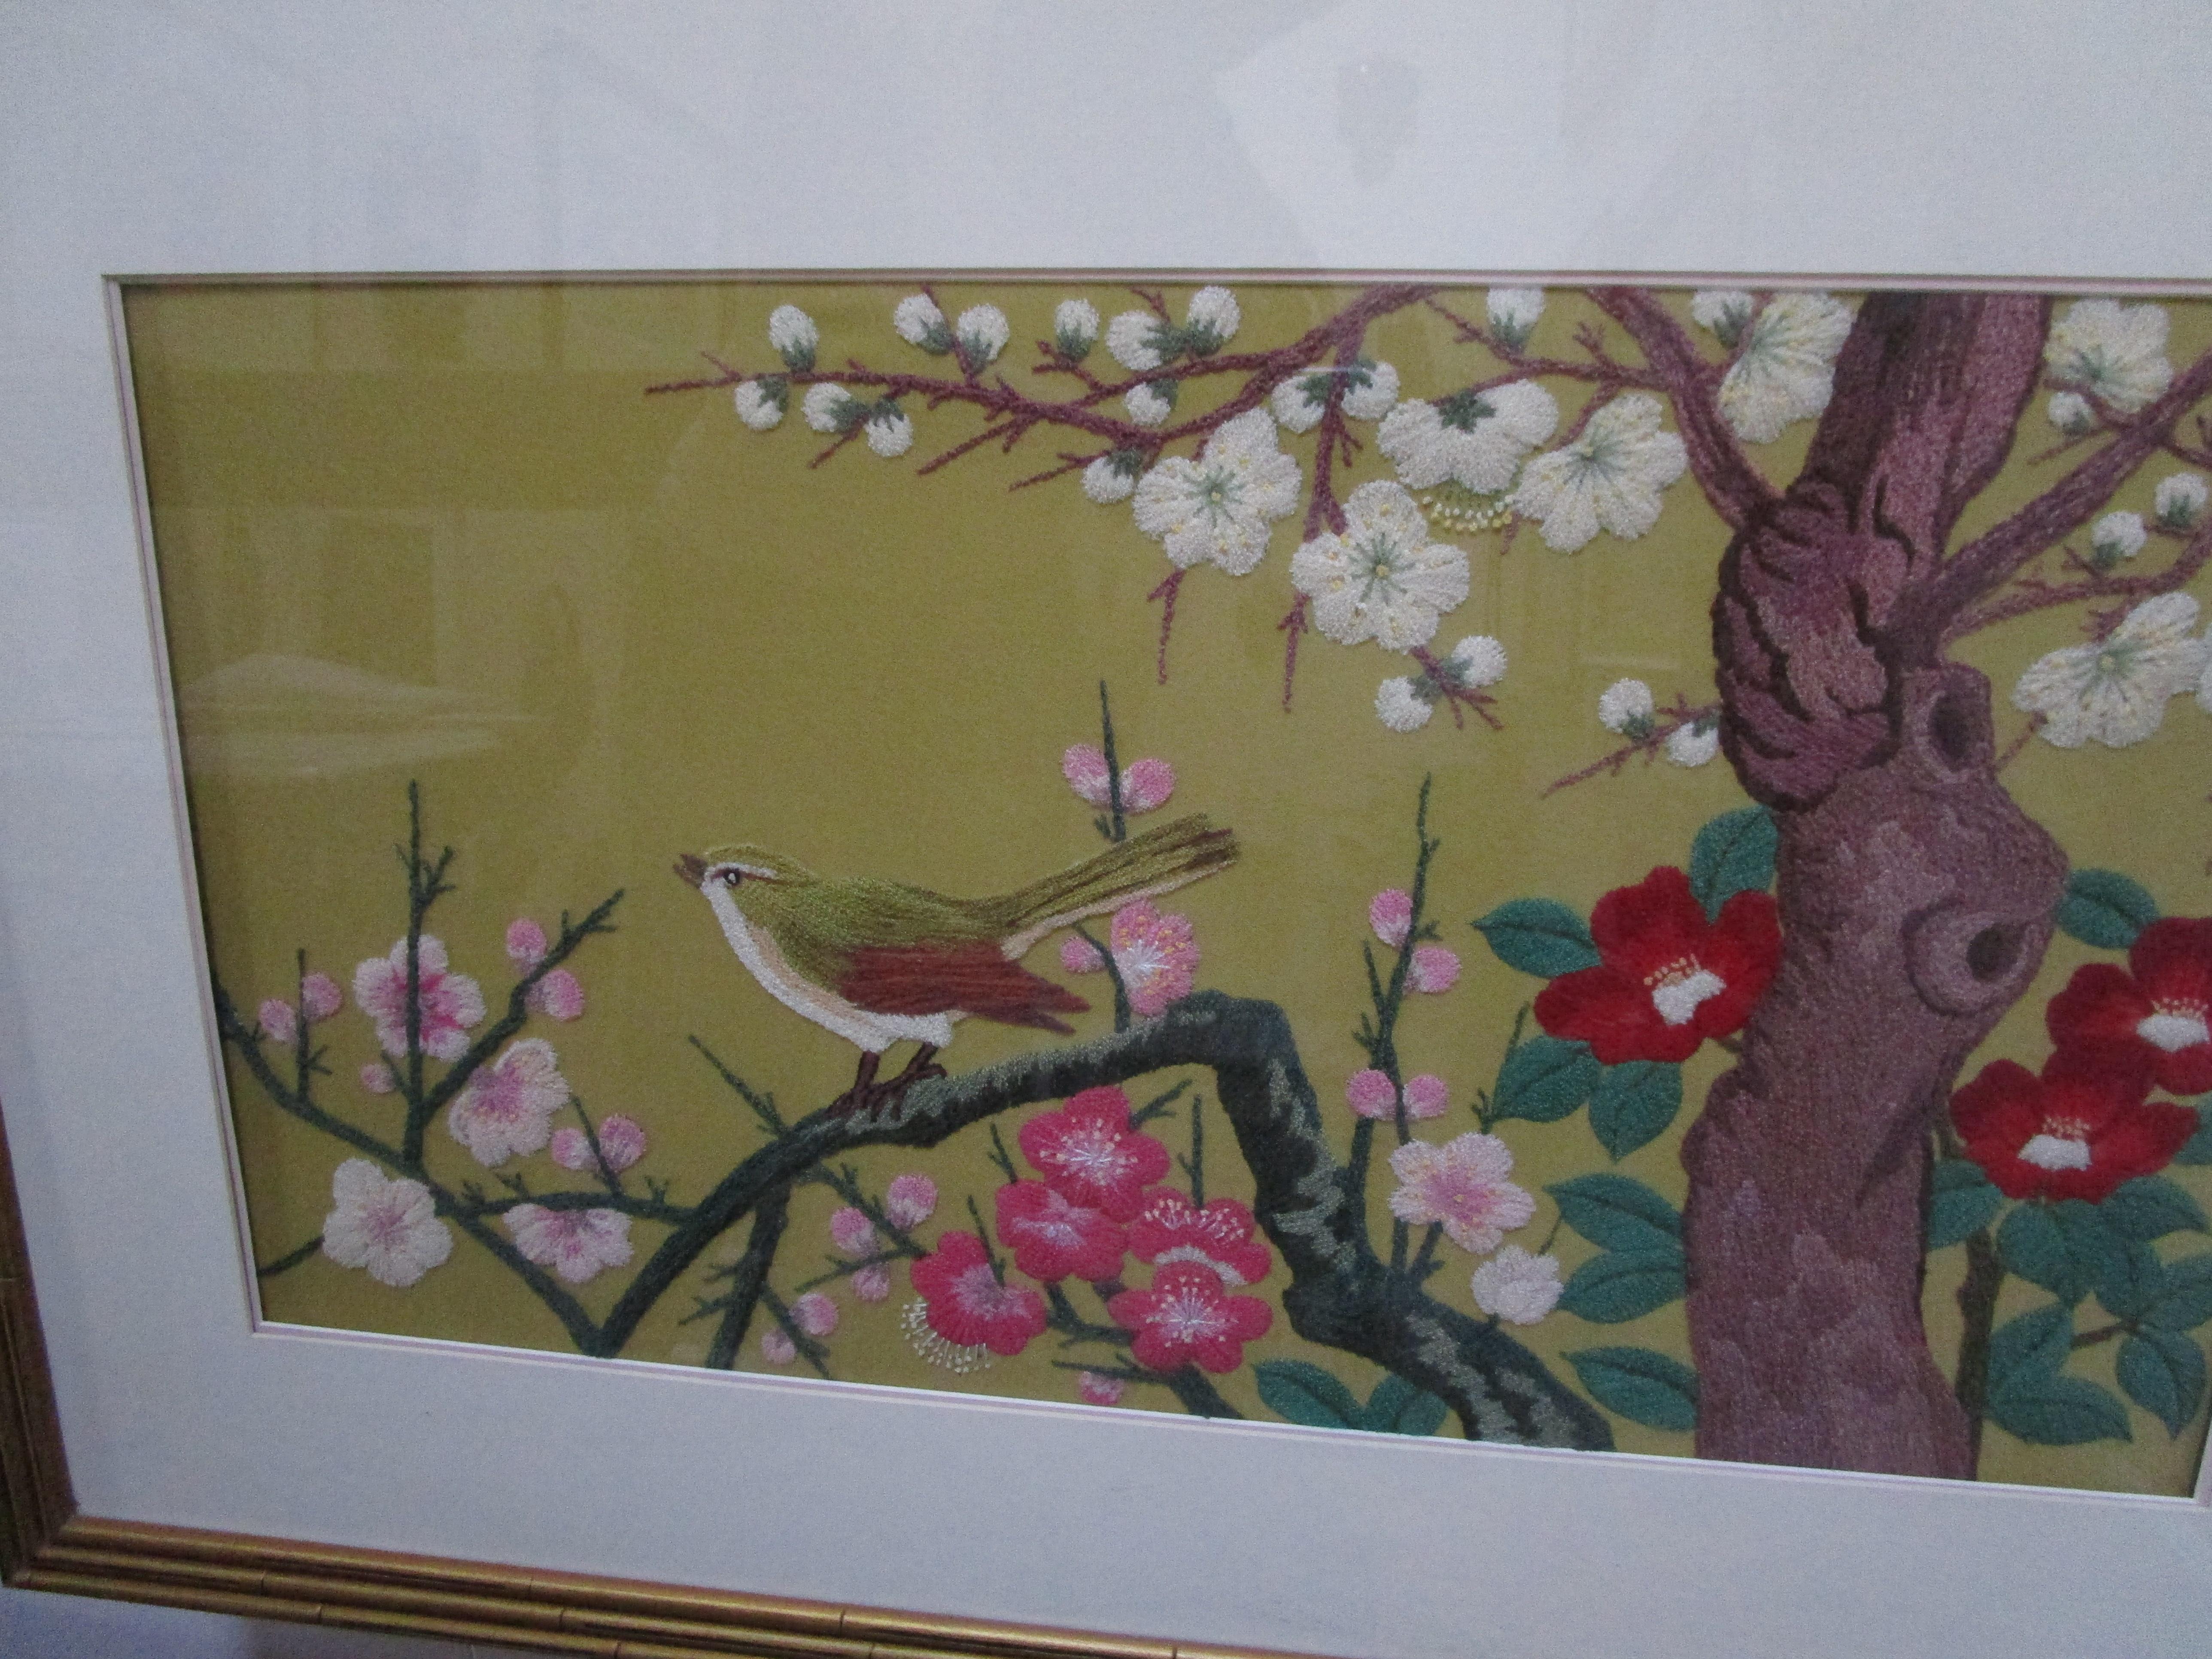 Silk 1940s Chinese Export Needlepoint with Nightingale on Branch with Blooms For Sale 5